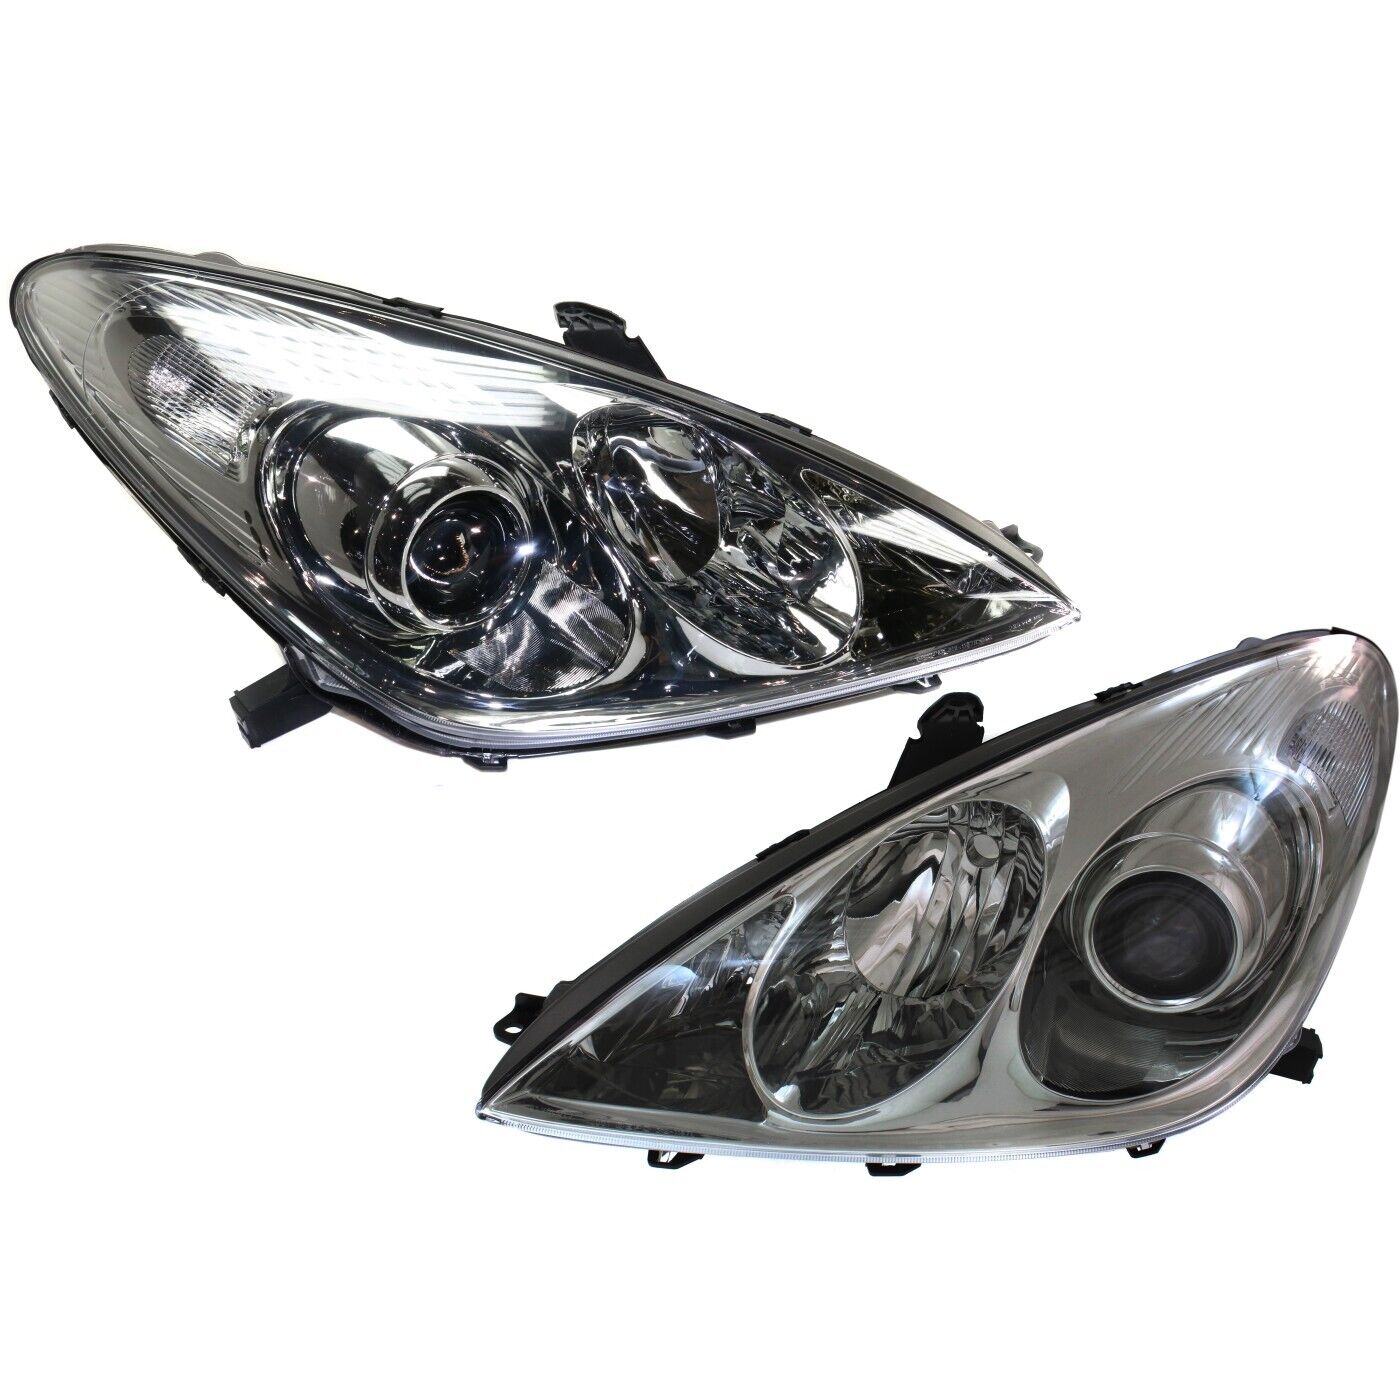 Headlight Set For 2005-2006 Lexus ES330 Left and Right HID 2Pc Headlamps Pair